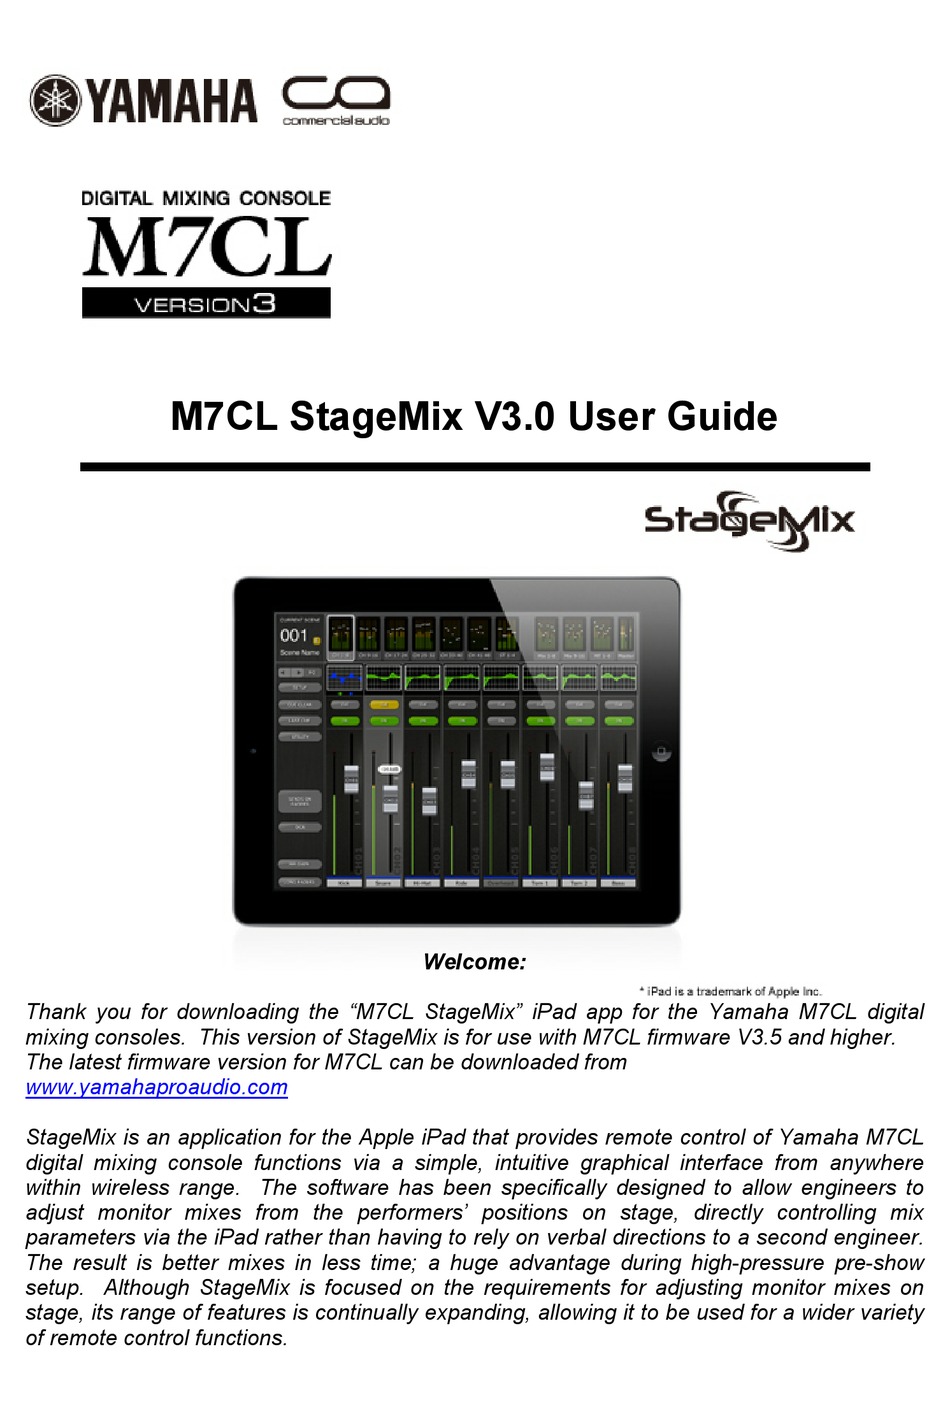 yamaha studio manager problems loading m7cl editor troubleshooting